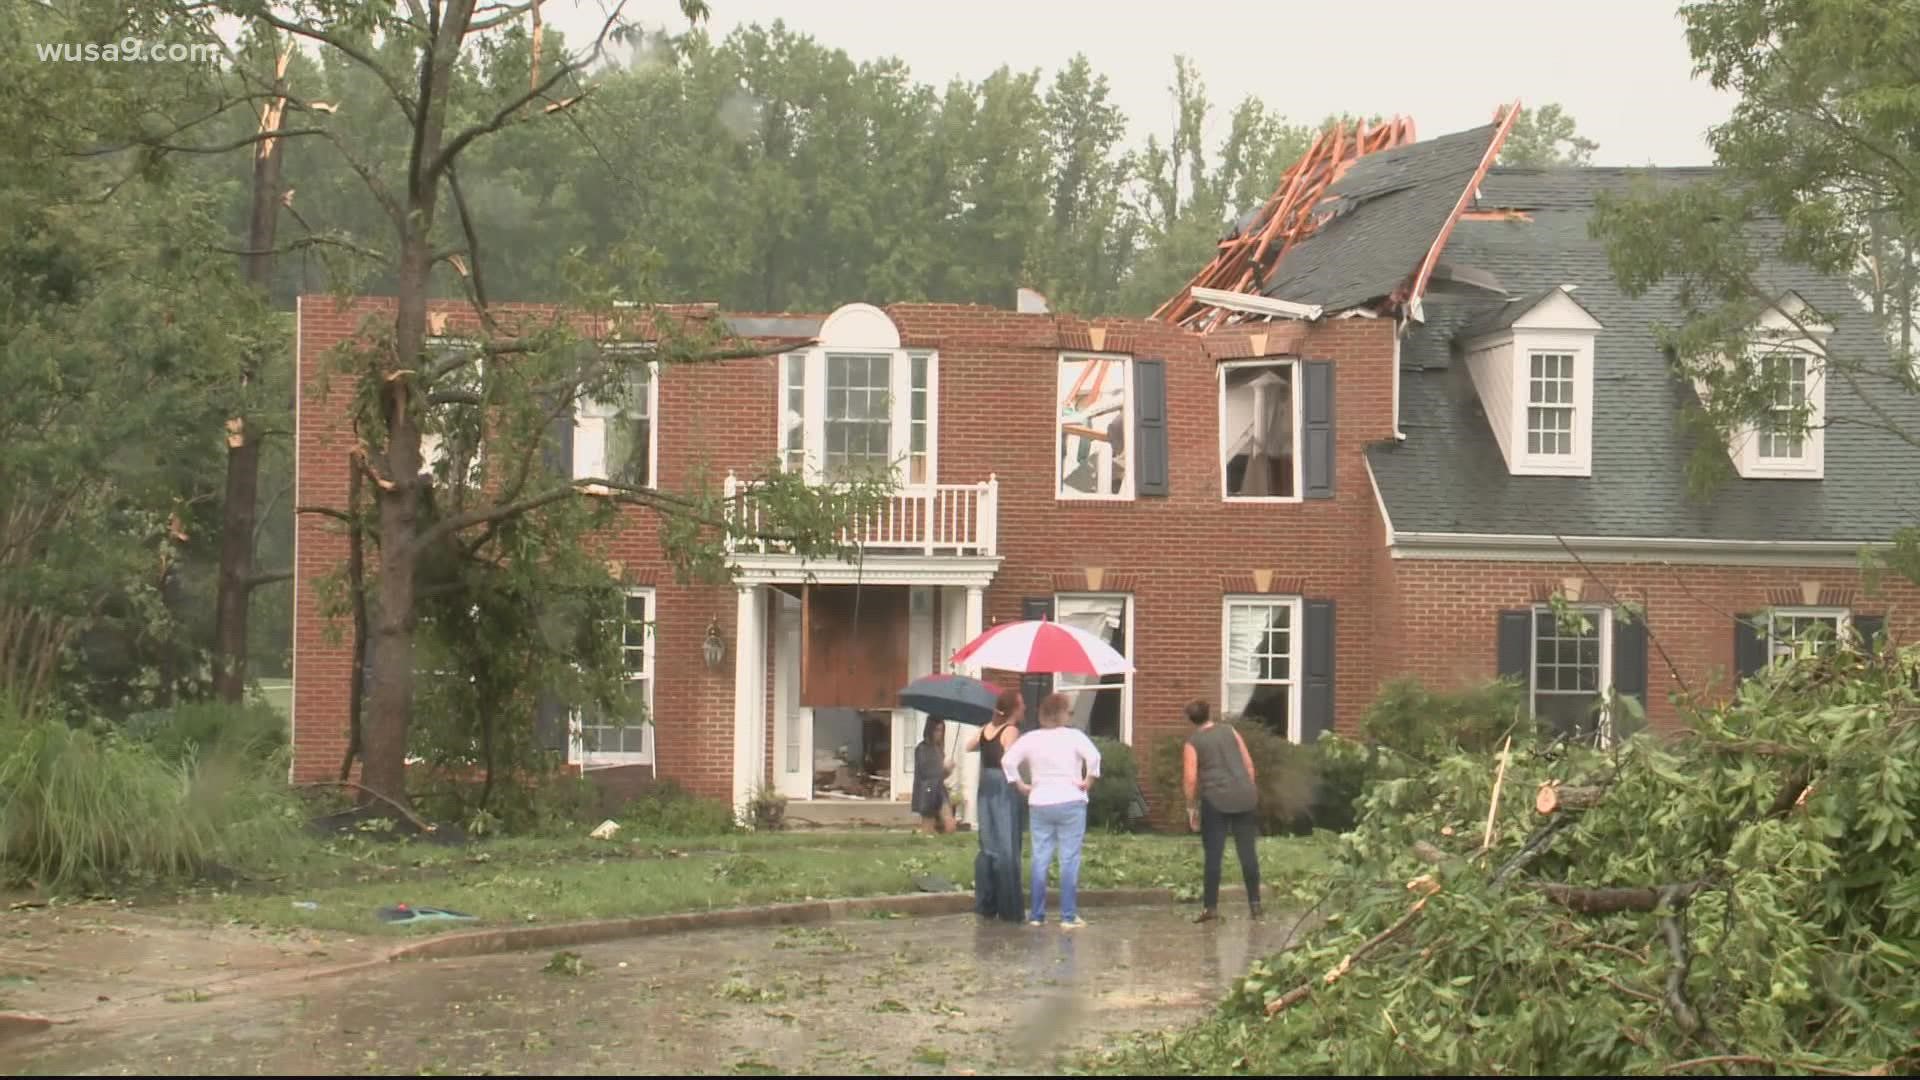 Wind blows the roof off Maryland home after tornado touches down ...